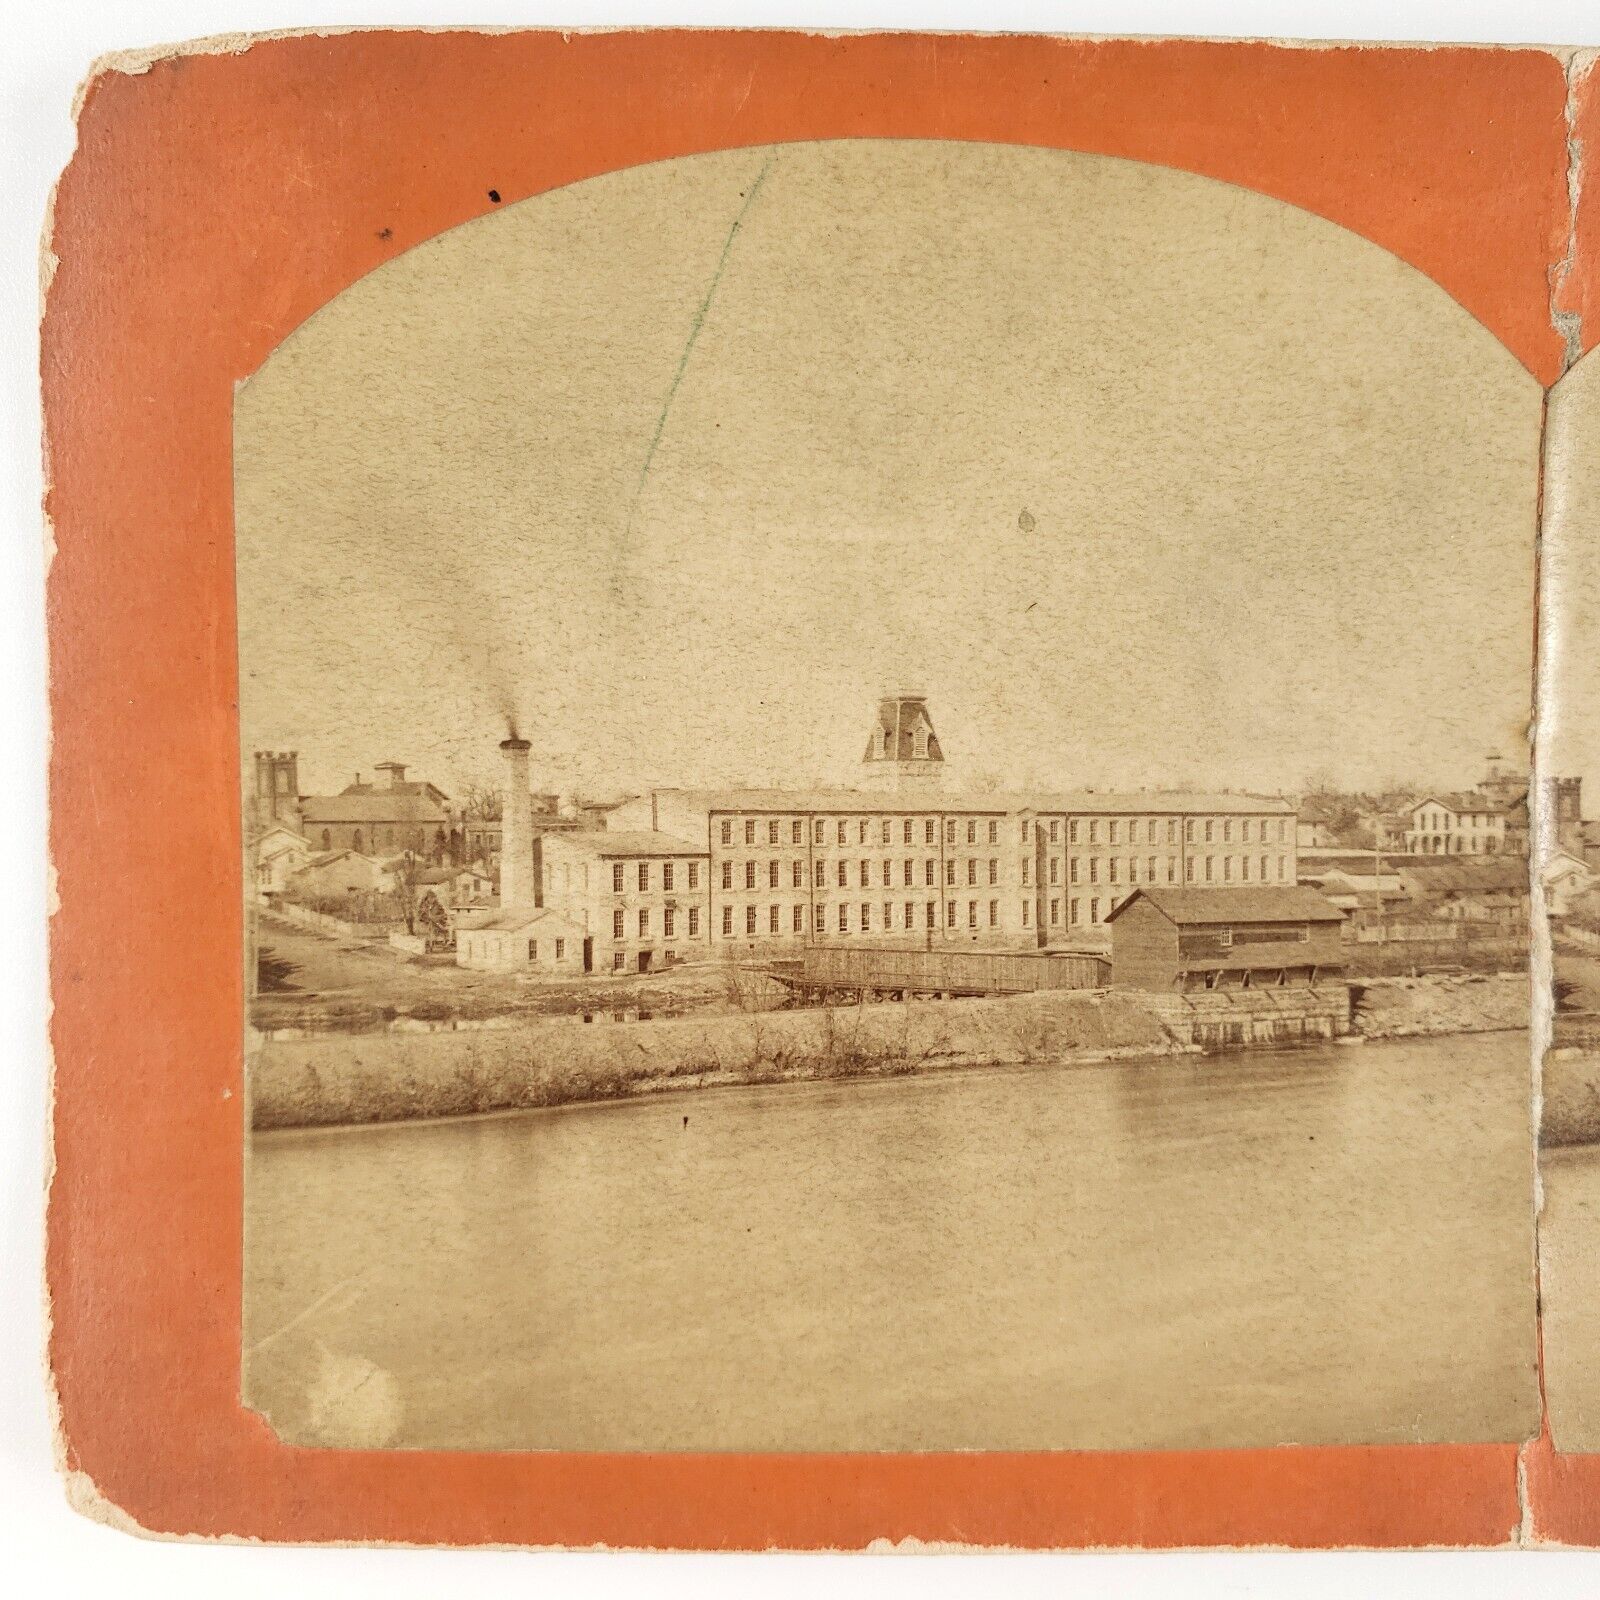 Unknown Mystery Mill Factory Stereoview c1870 Smoke Stack River Photo Card A2200